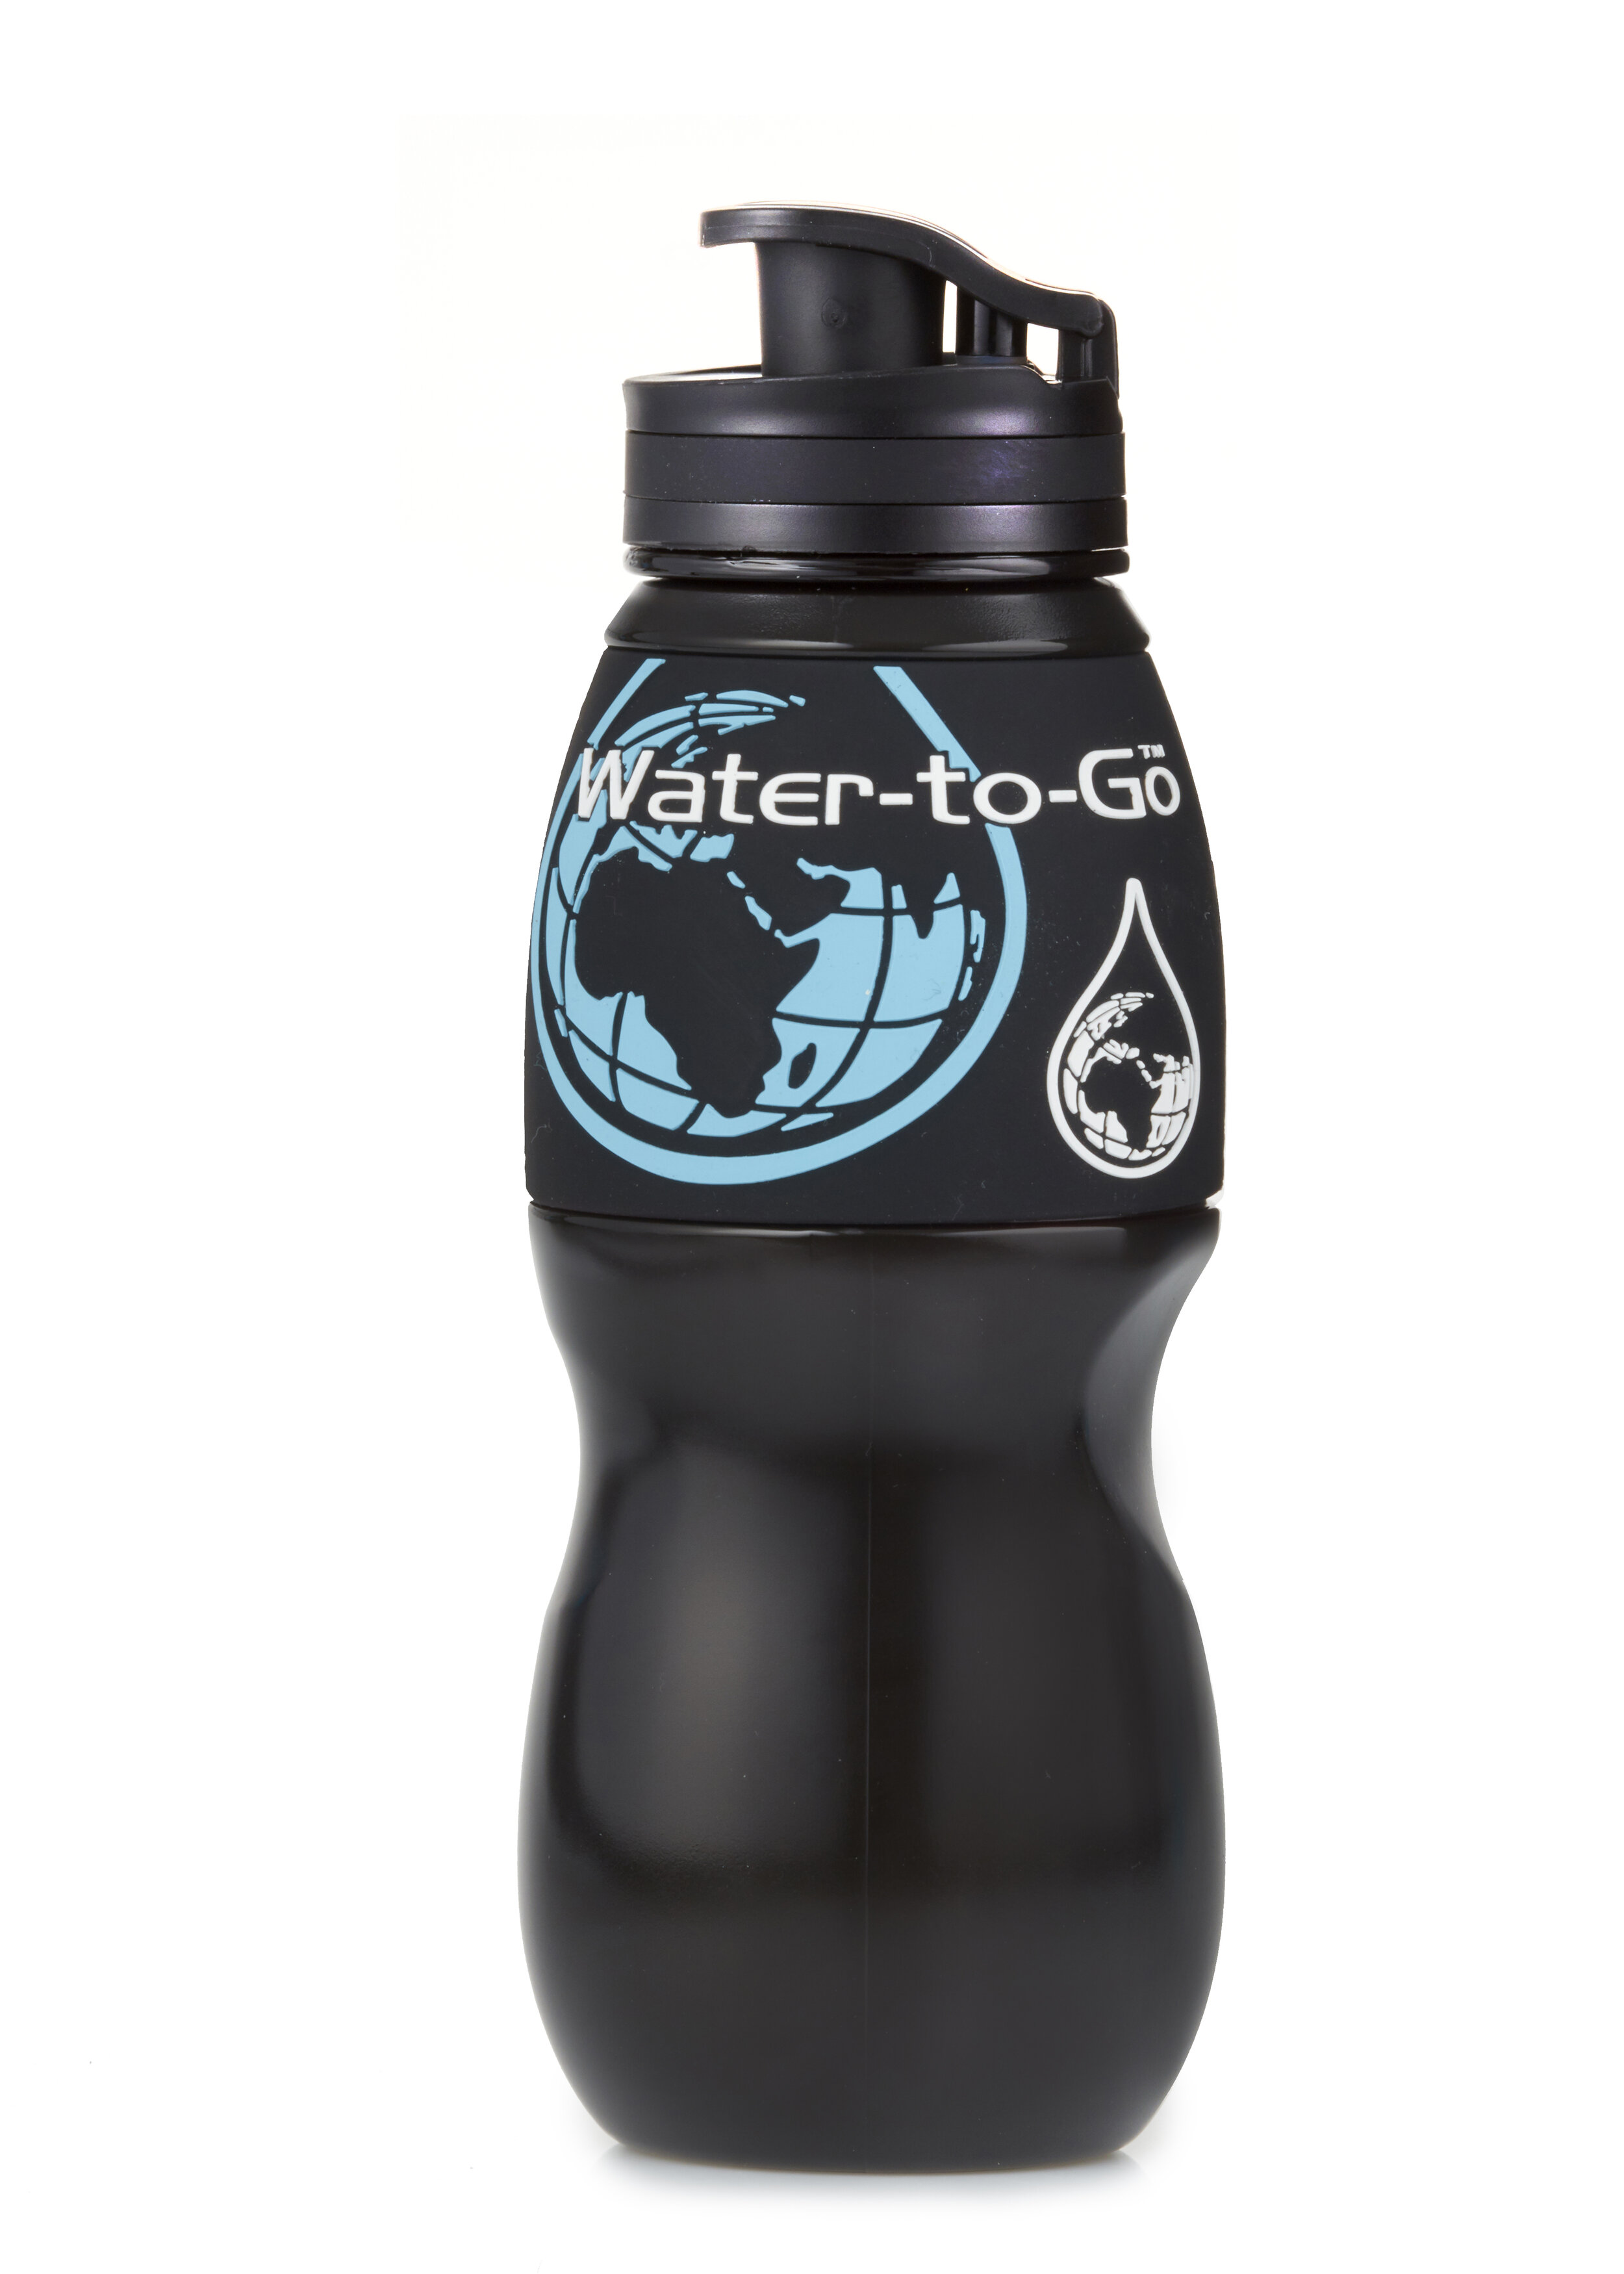 Water to go review